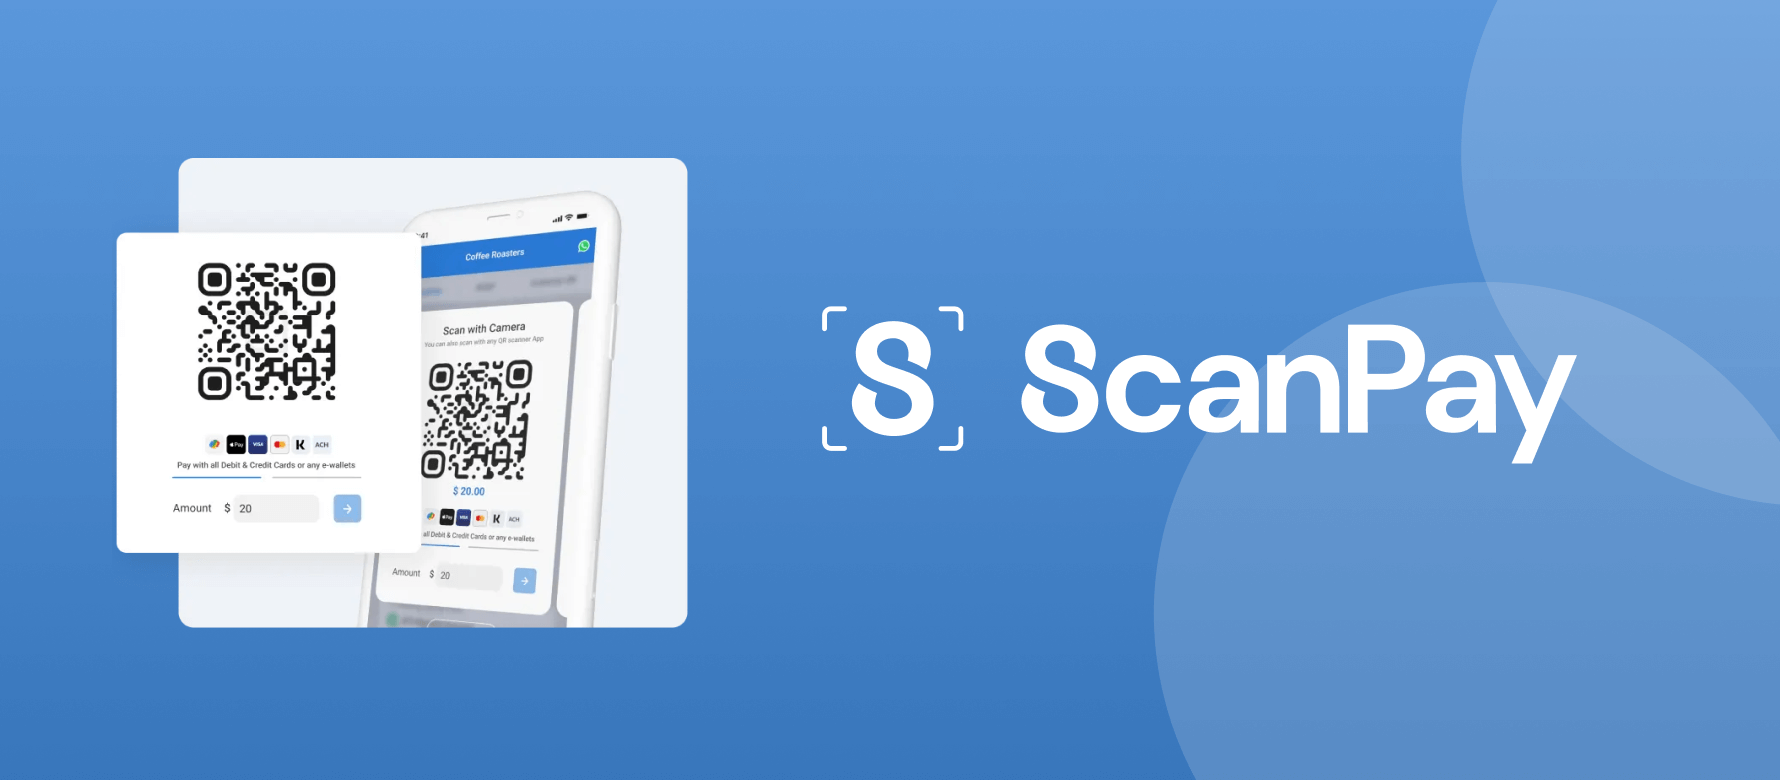 Case Study | App screen design of Scanpay, a feature-fledged FinTech application that helps Small Business users in the United States collect payments without a card terminal.